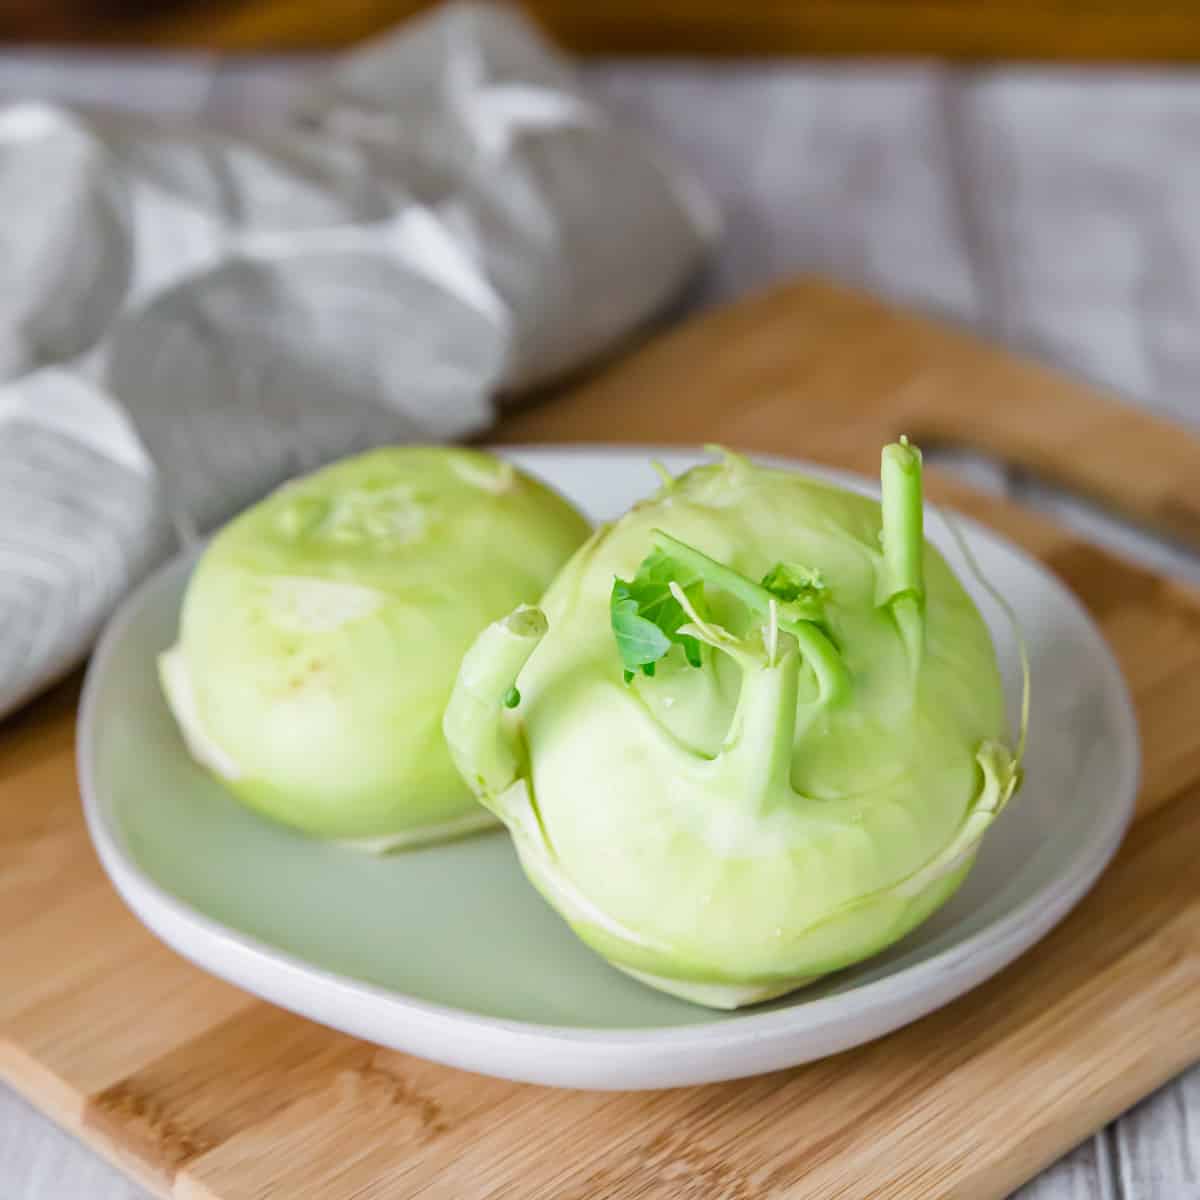 Raw kohlrabi on a plate before being sliced and roasted in the oven.